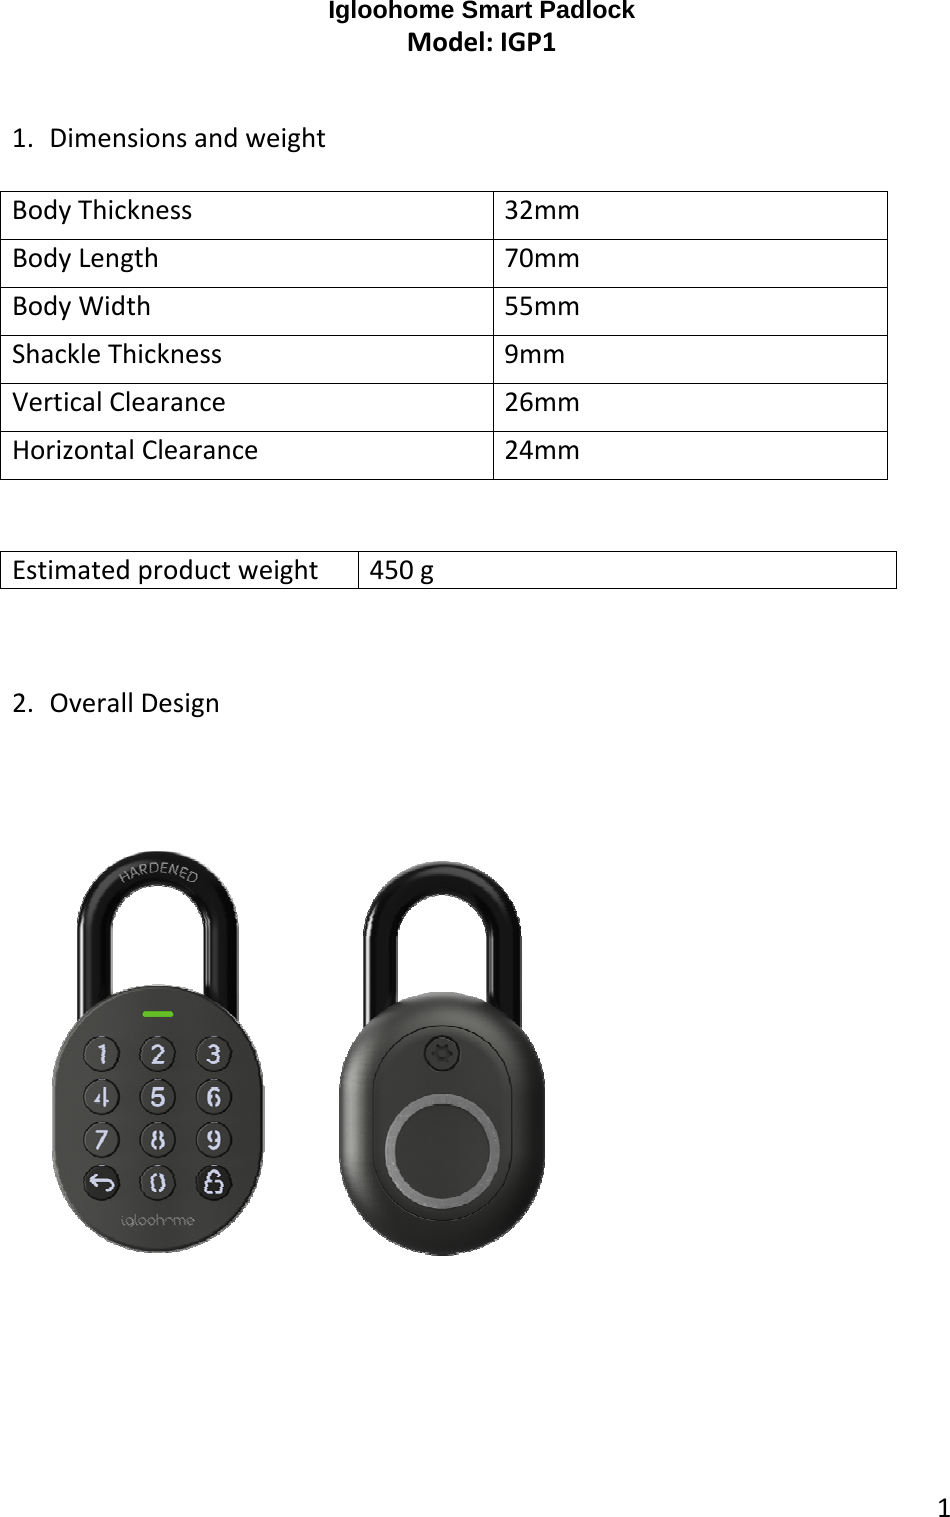 1Igloohome Smart PadlockModel:IGP11. DimensionsandweightBodyThickness32mmBodyLength70mmBodyWidth55mmShackleThickness9mmVerticalClearance 26mmHorizontalClearance24mmEstimatedproductweight 450g2. OverallDesign